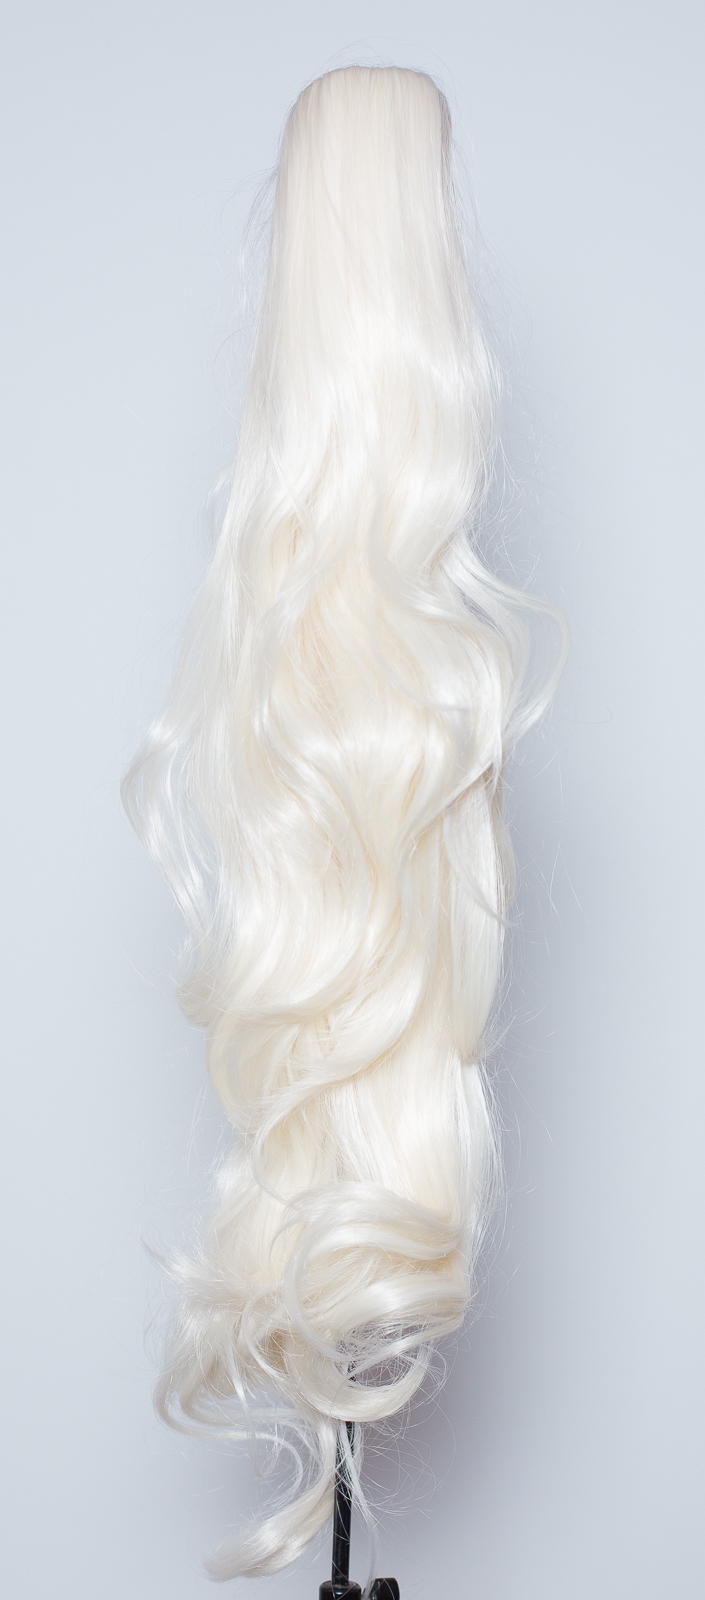 PONYTAIL Clip In On Hair Extensions White Blonde 60M REVERSIBLE 4